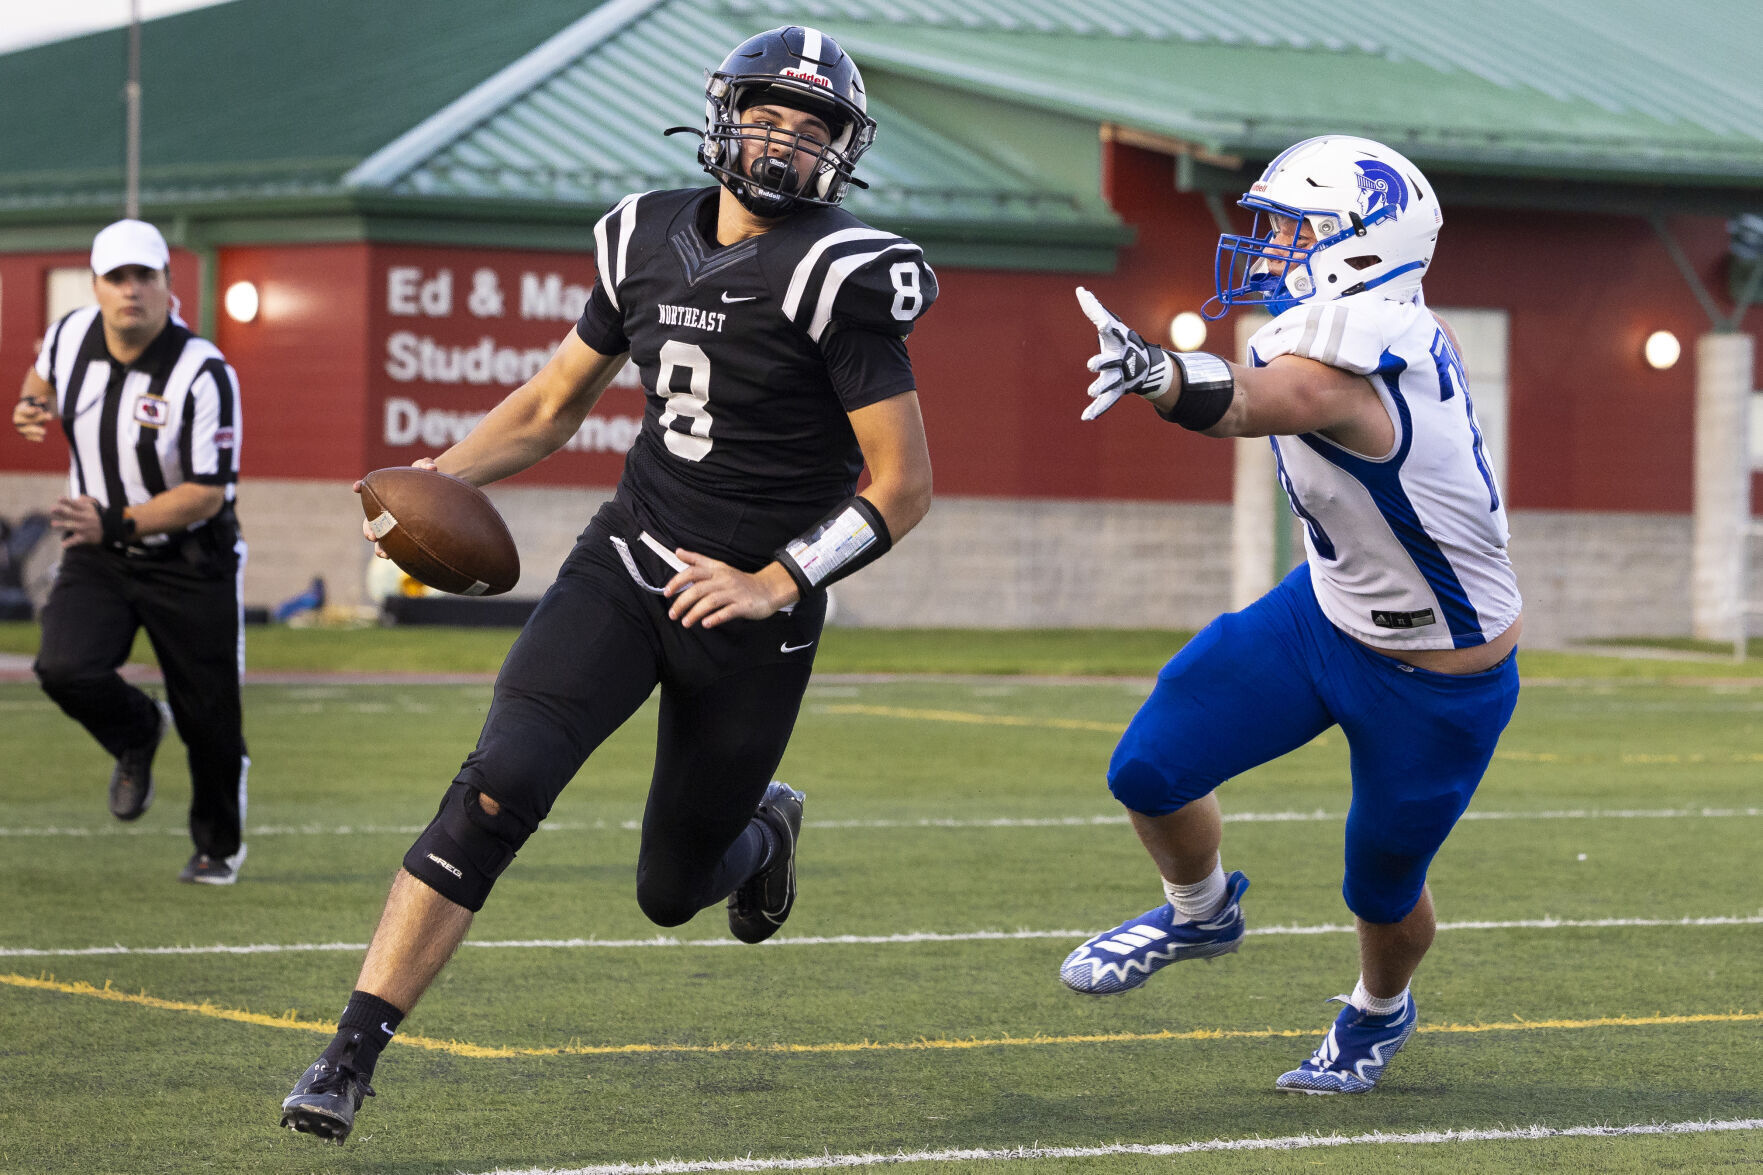 Preview and Predictions for Week 6 High School Football Games in Nebraska